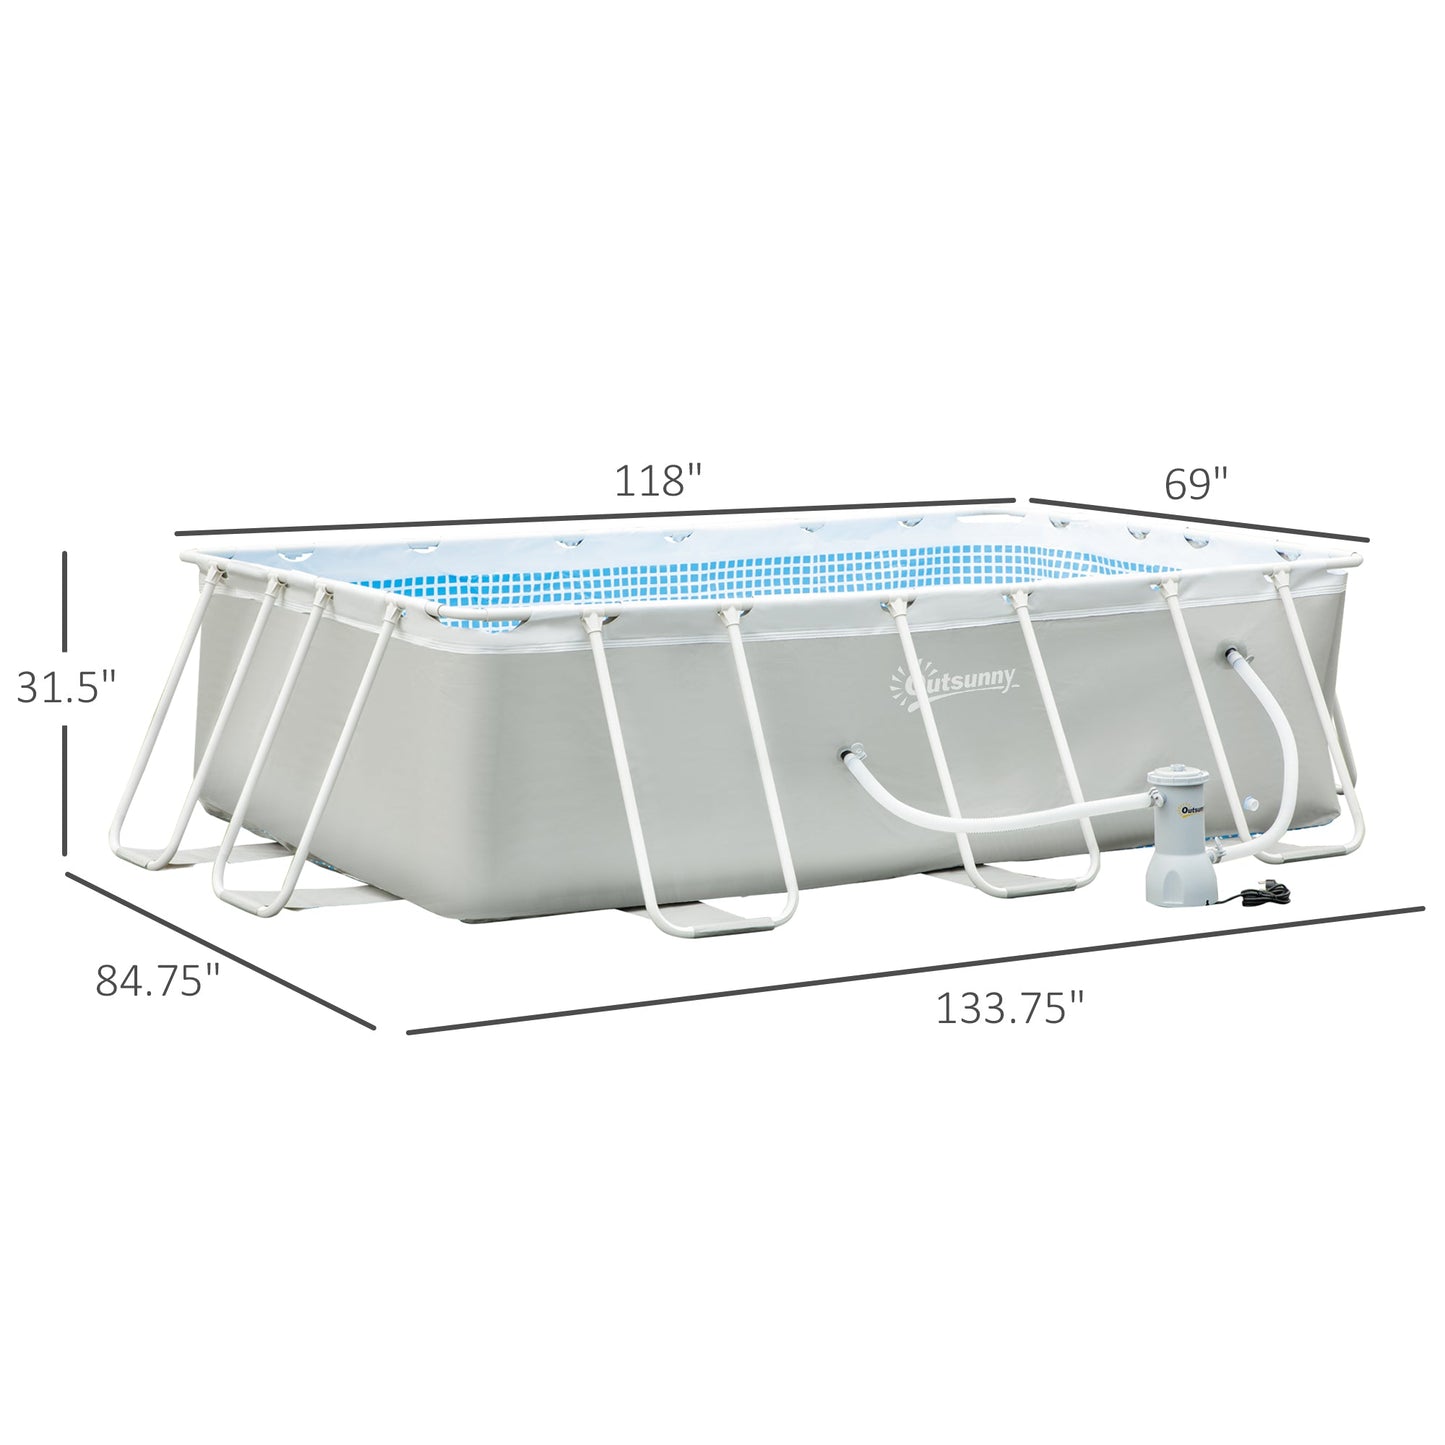 Outdoor and Garden-11ft x 7ft x 32in Steel Frame Pool with Filter Pump - Outdoor Style Company